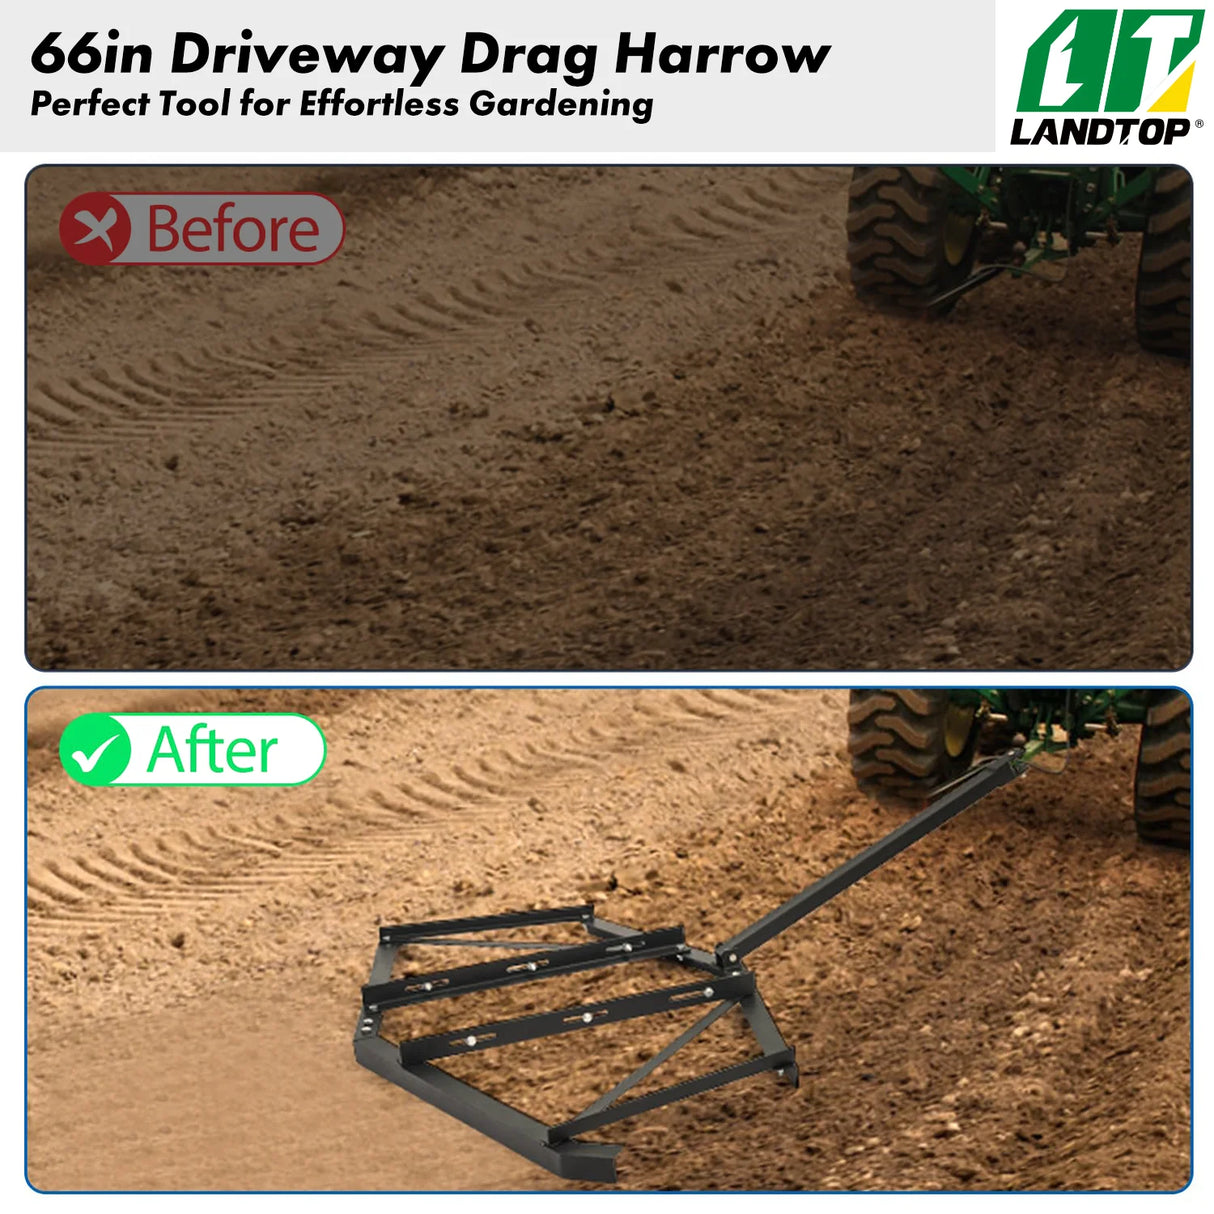 Driveway Drag 74" Width, Driveway Drag Grader w/ 3 Sets Adjustable Bolts & 2 Reinforcement Bars, Tow Behind Drag Harrow with Pin-Style Hitch, Garden Lawn Tractor Driveway Grader for ATVs, UTV